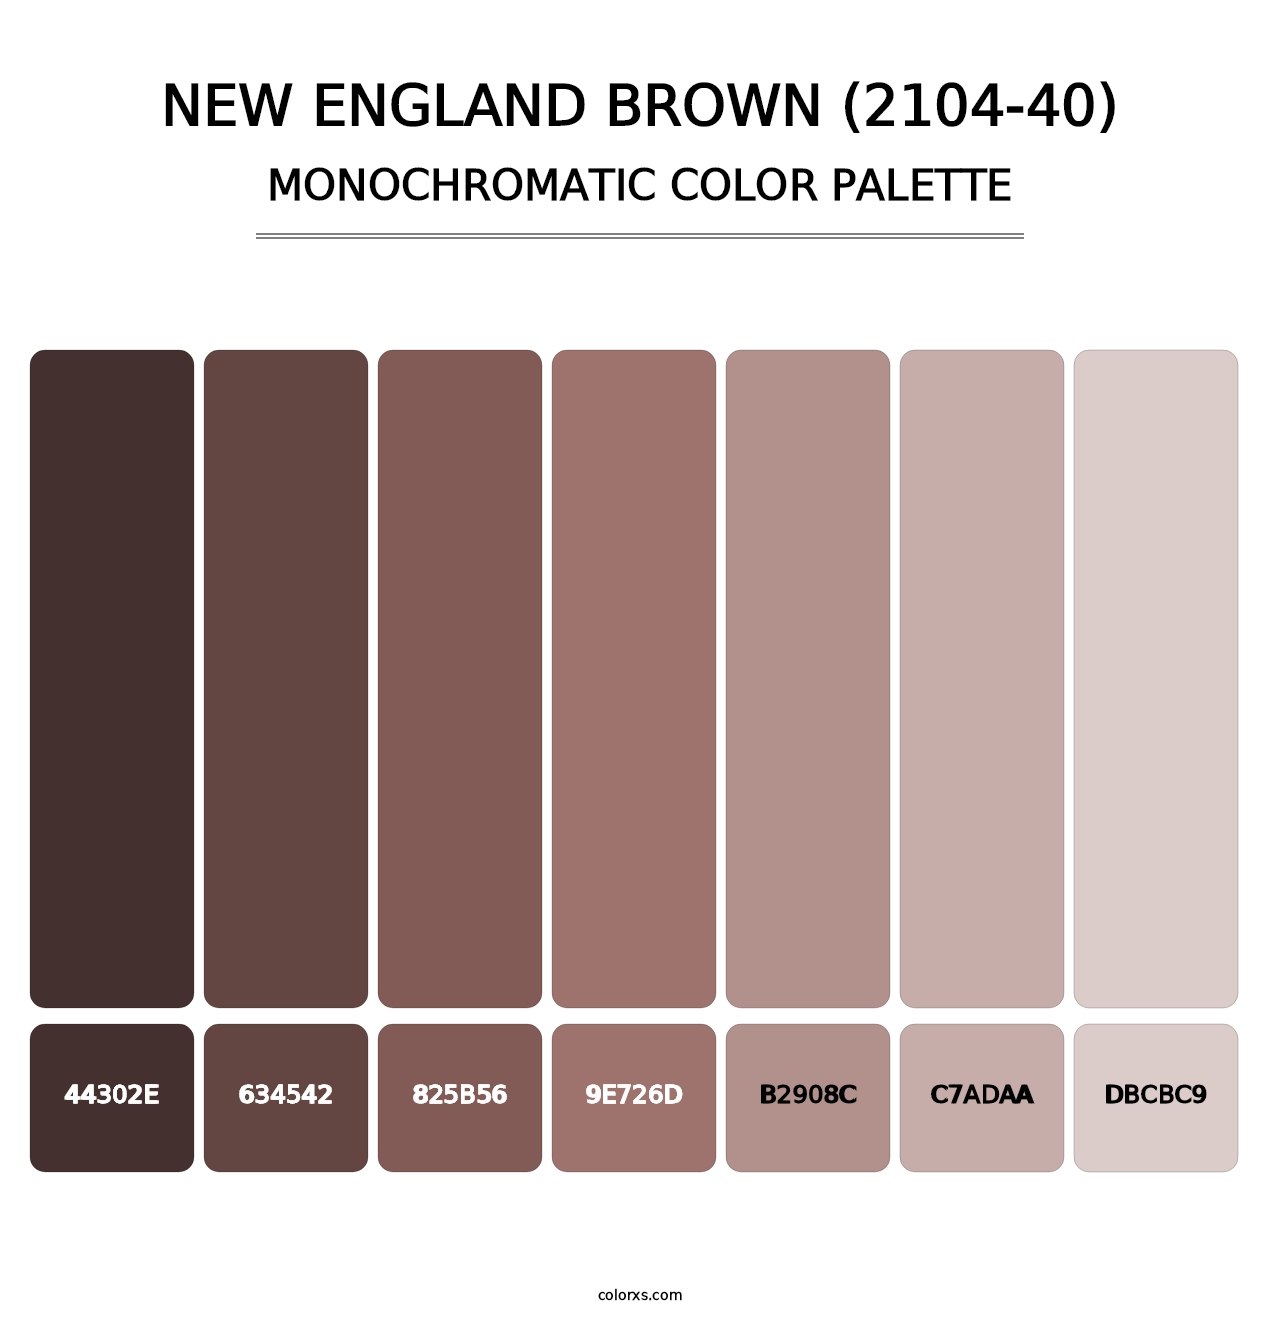 New England Brown (2104-40) - Monochromatic Color Palette